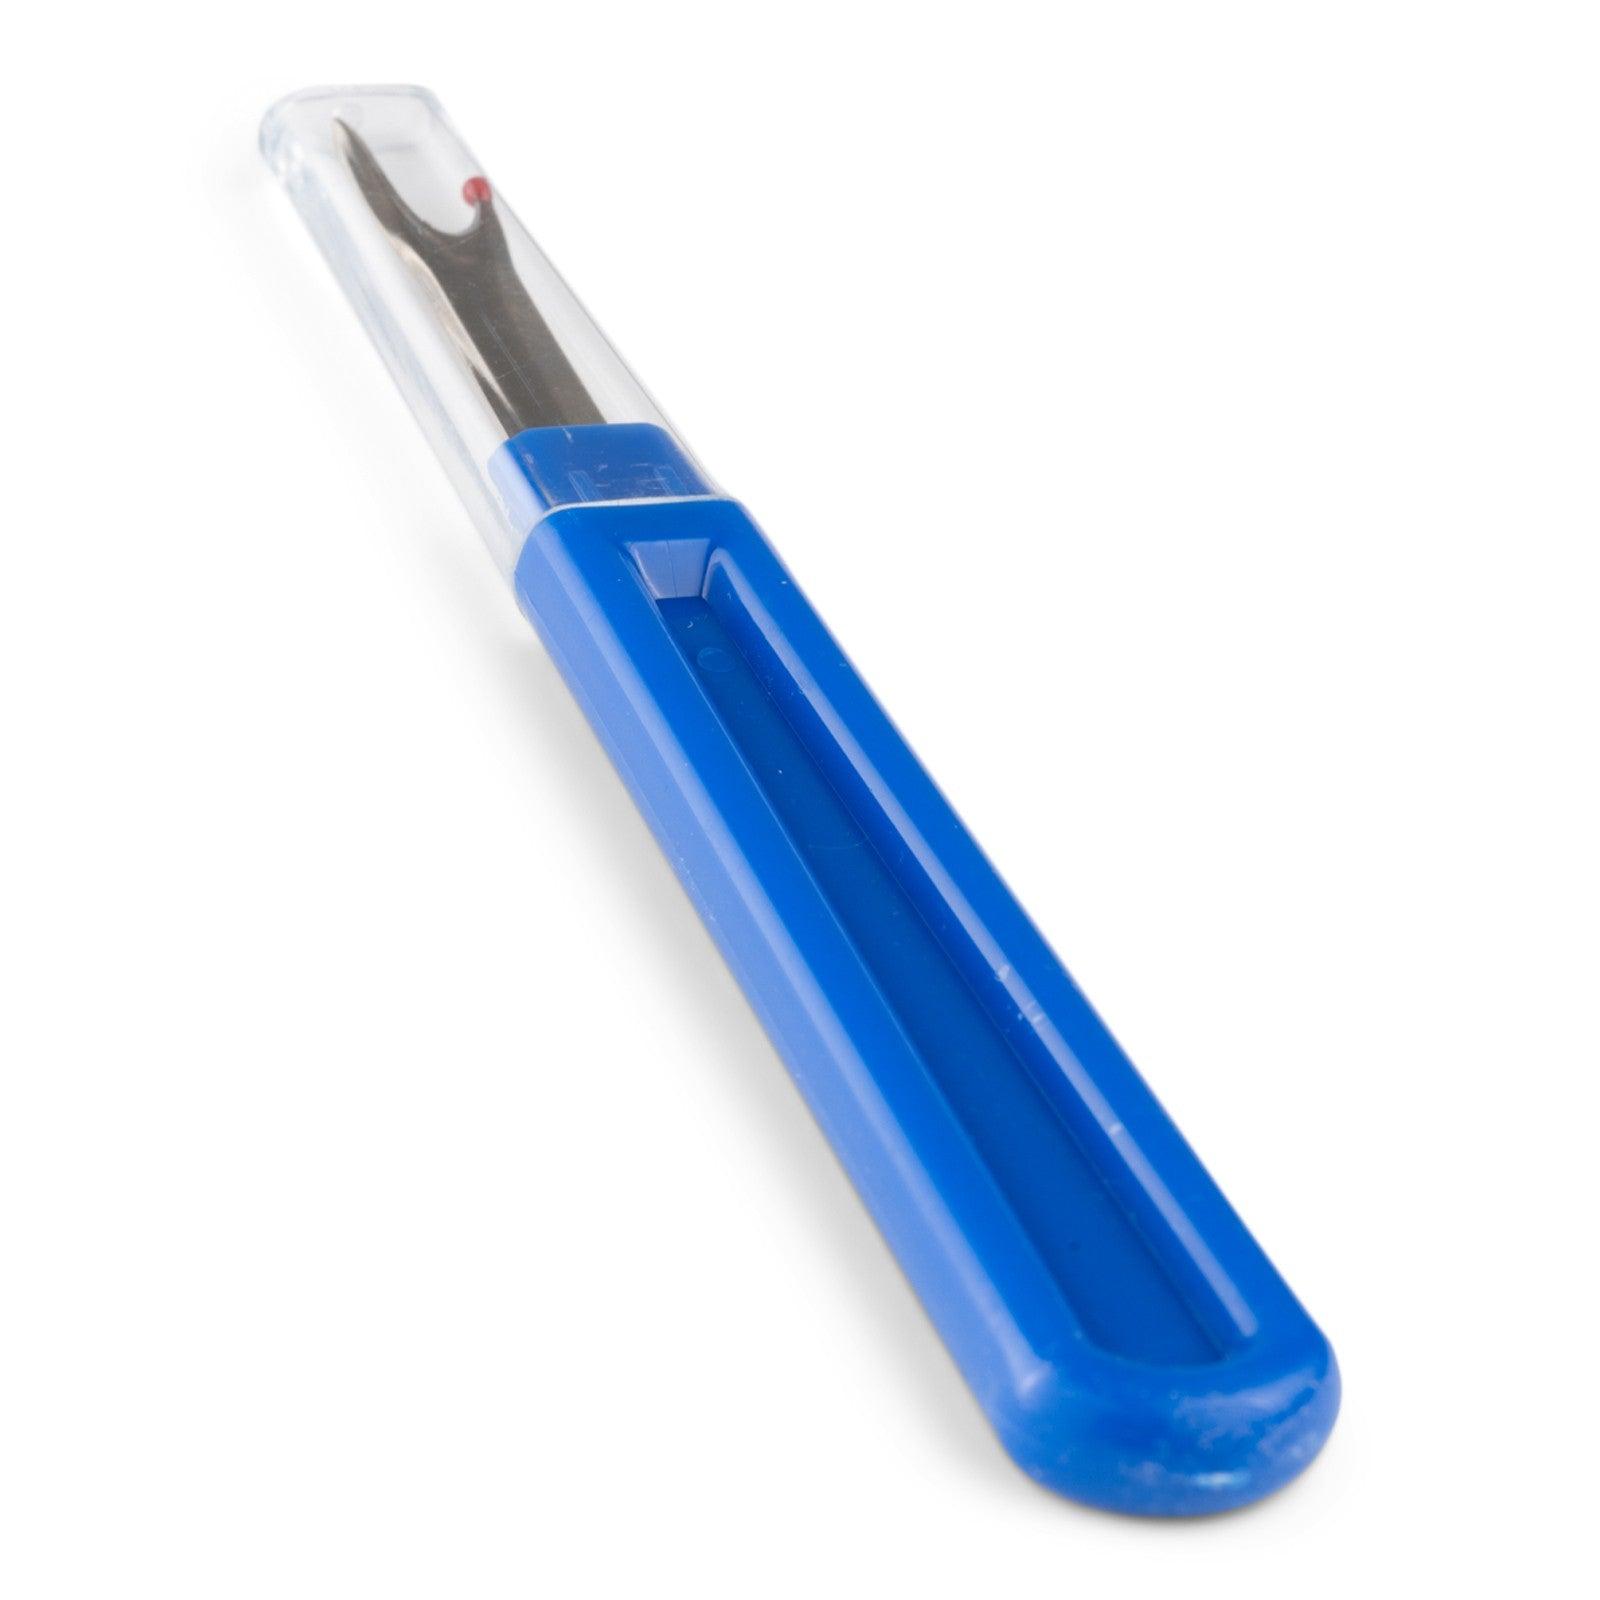 How To Use A Seam Ripper - Updated 